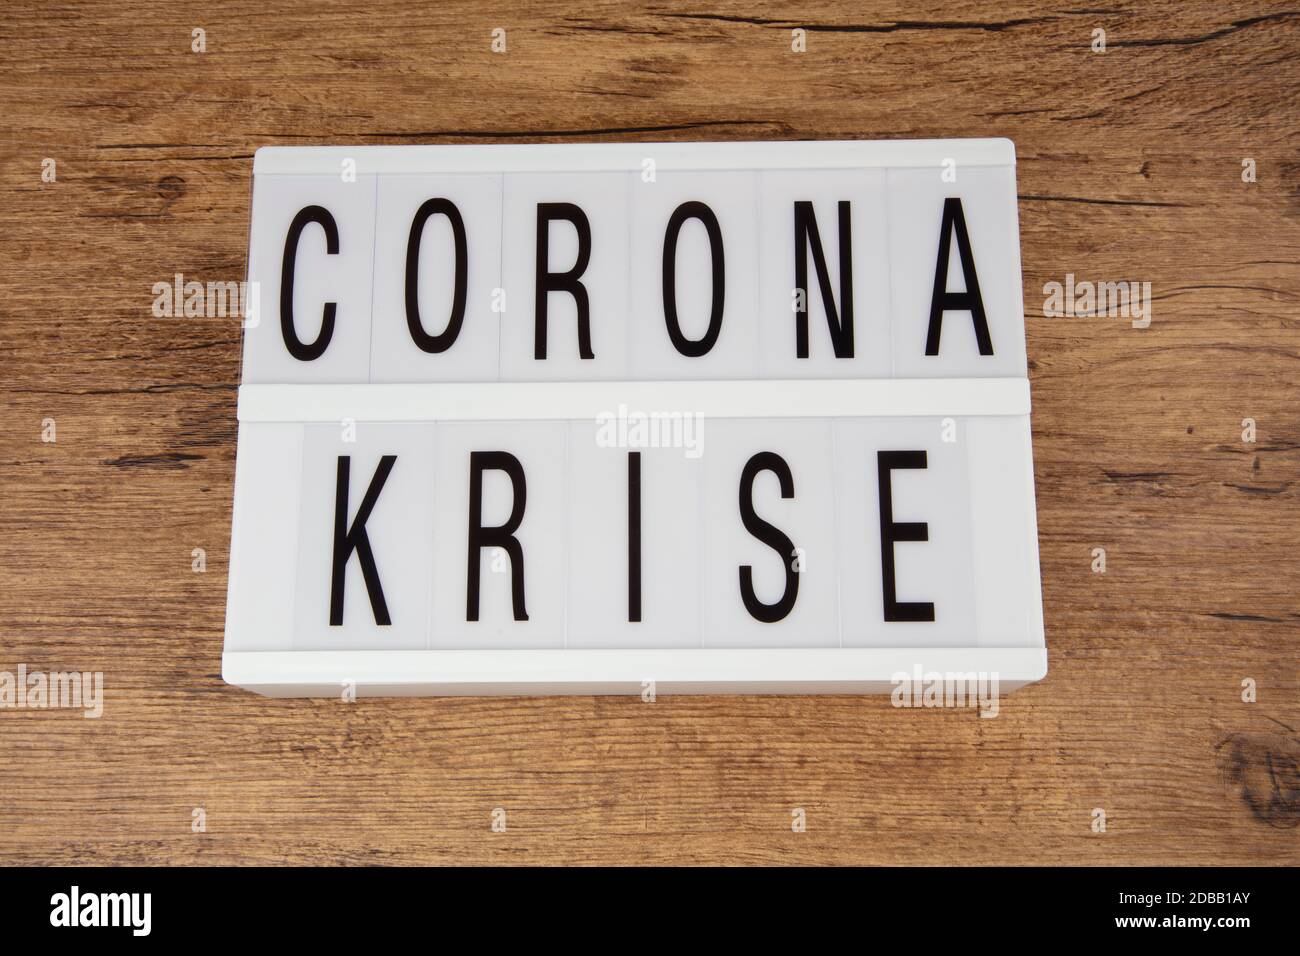 Concept: Corona Krise  in german language over wooden background means Corona Crisis Stock Photo